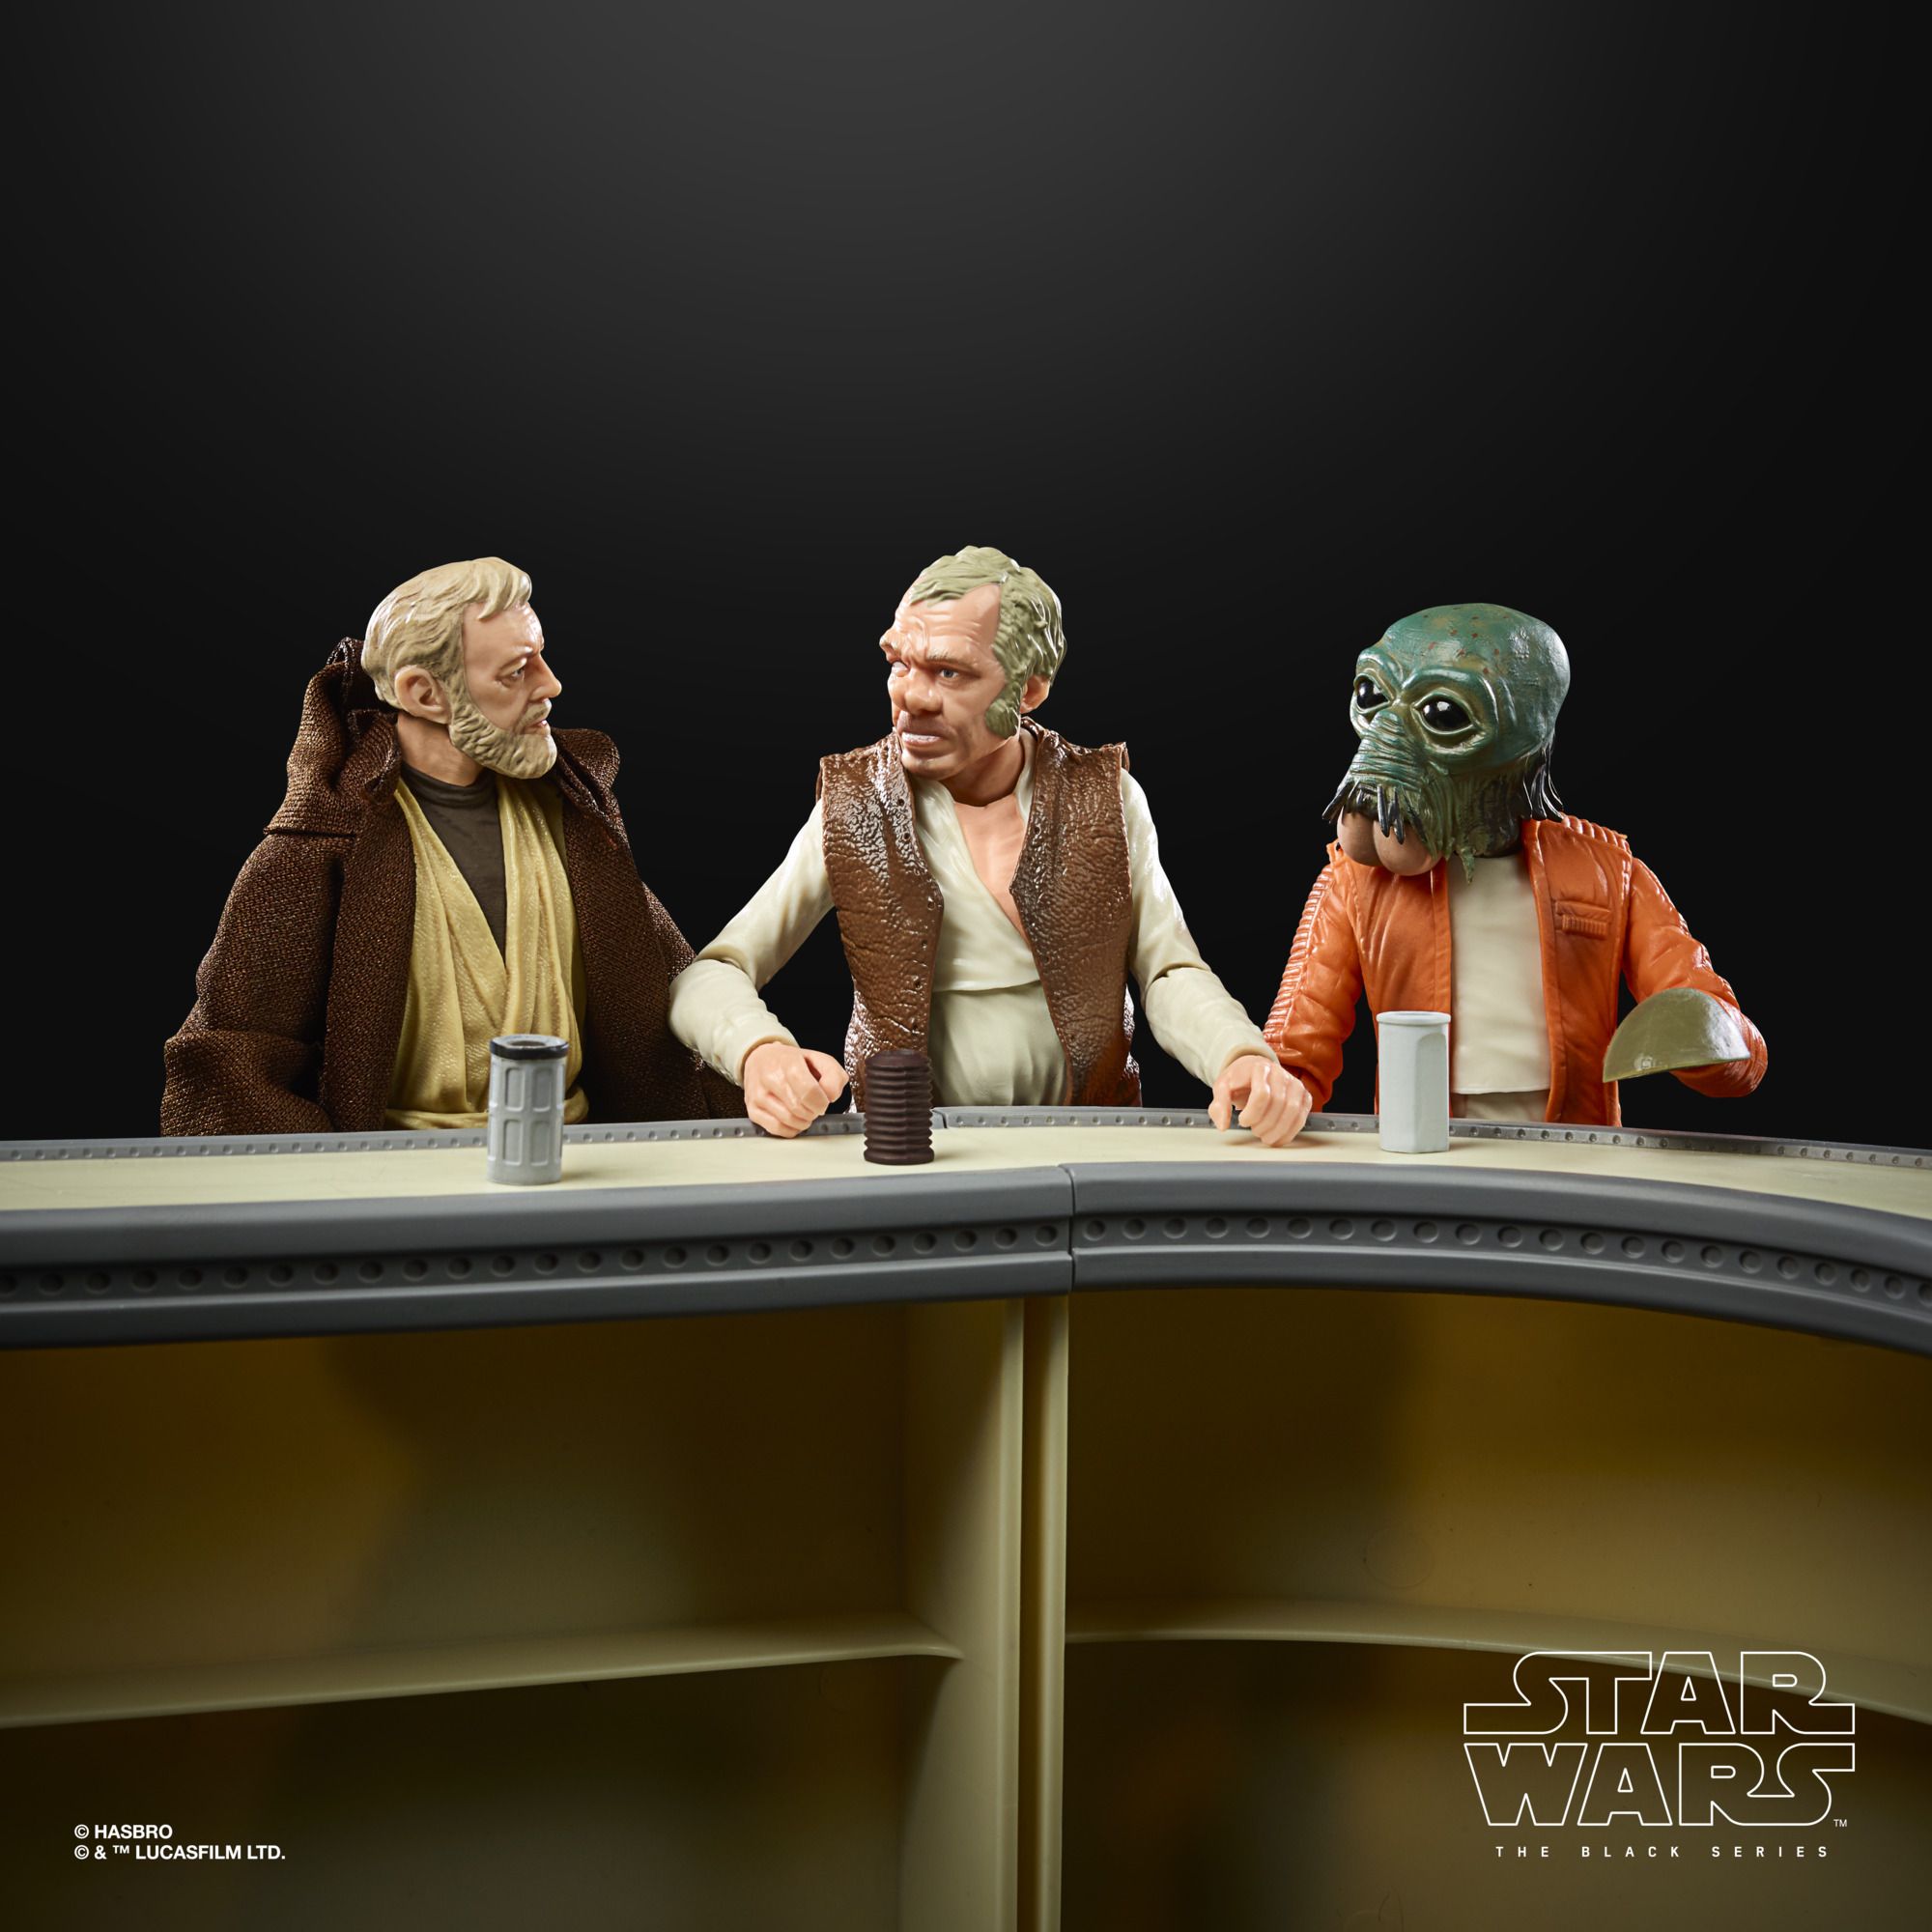 Star Wars The Black Series The Power of The Force Cantina Showdown Playset image